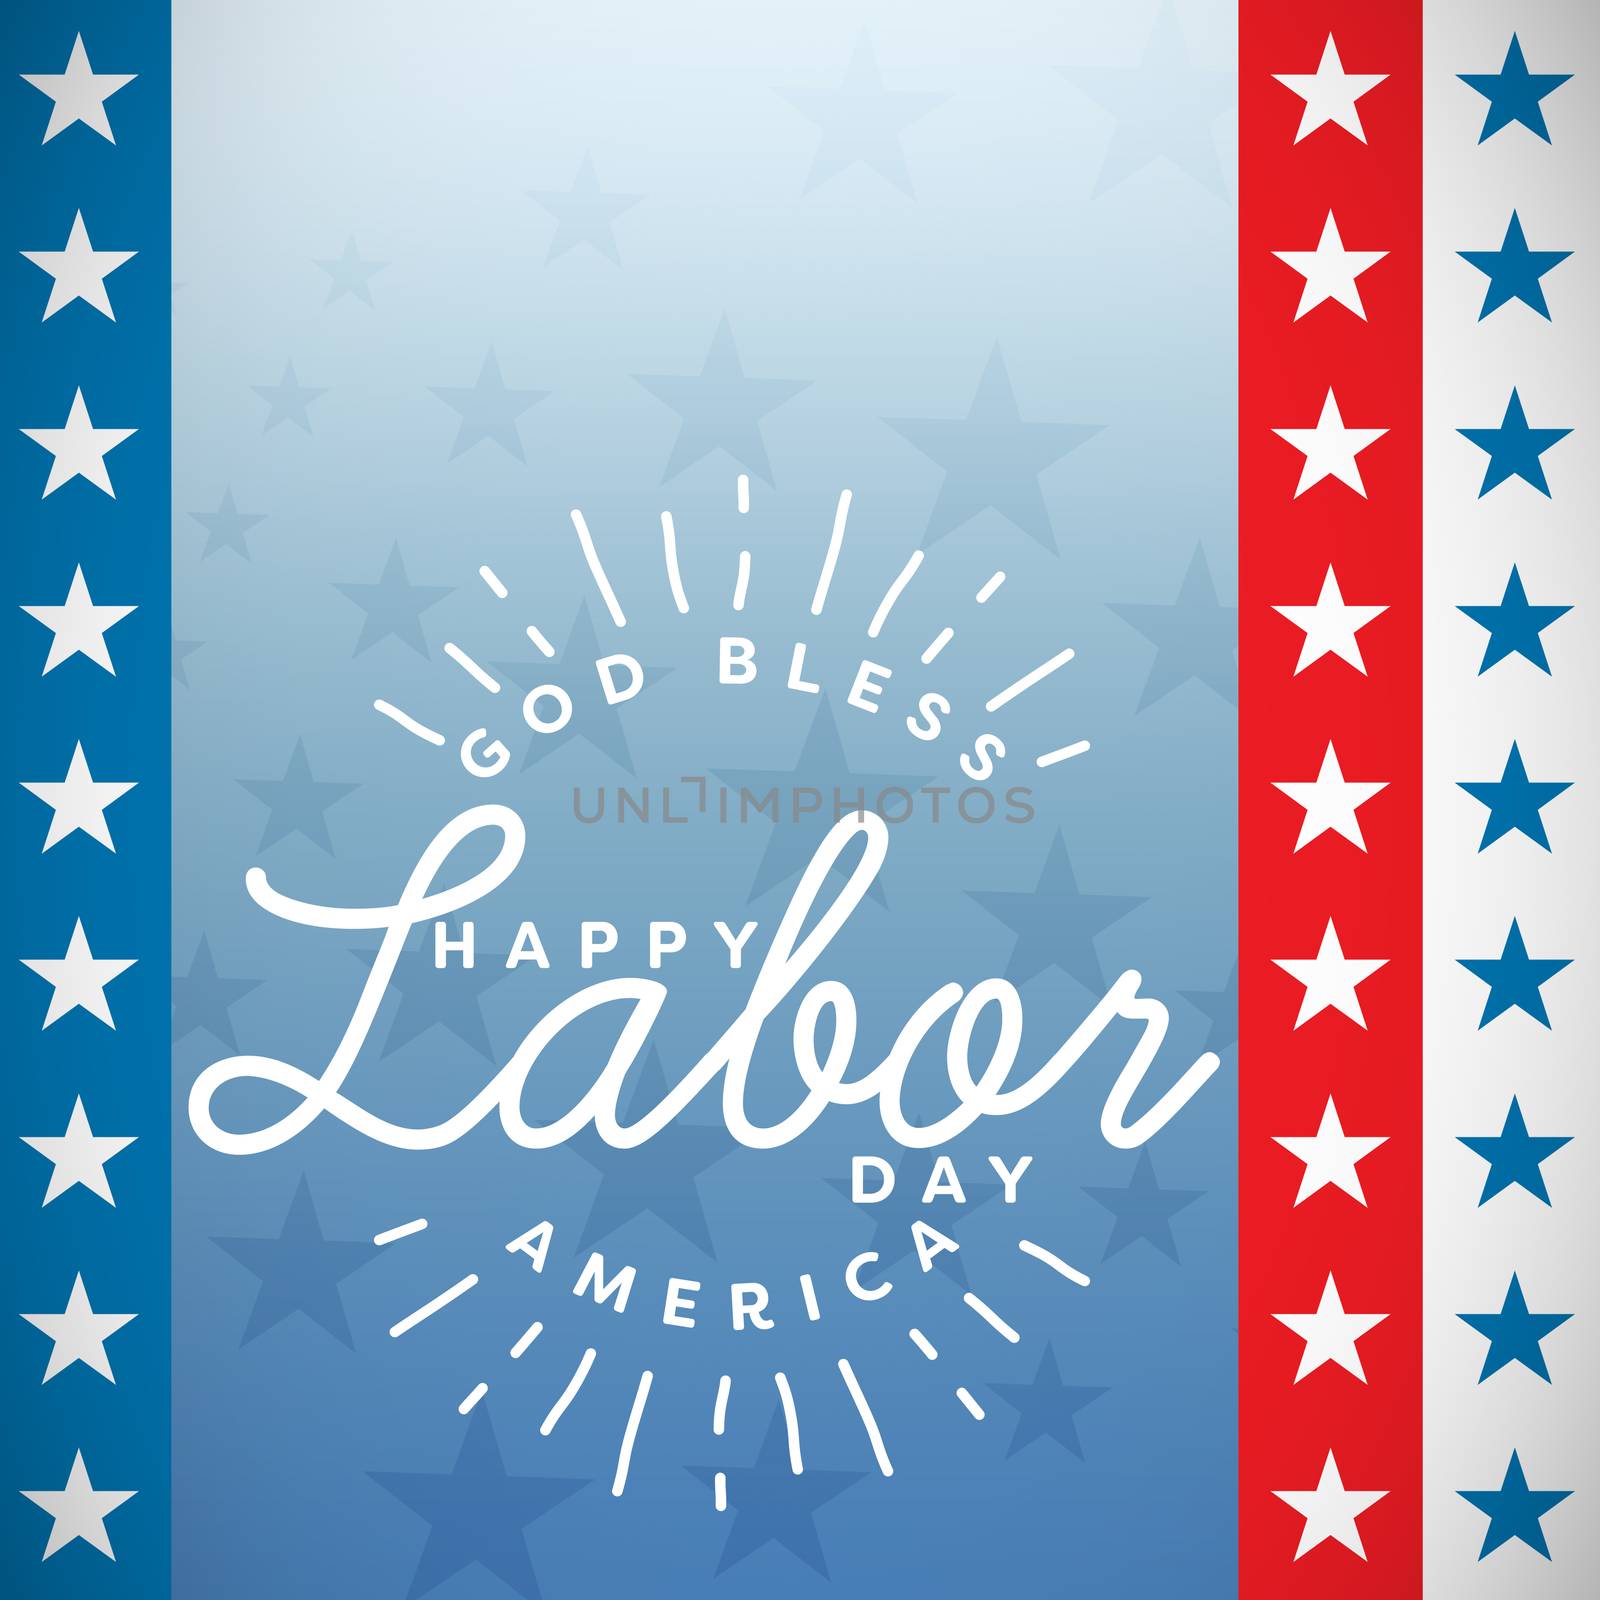 Composite image of happy labor day and god bless America text against digitally generated background